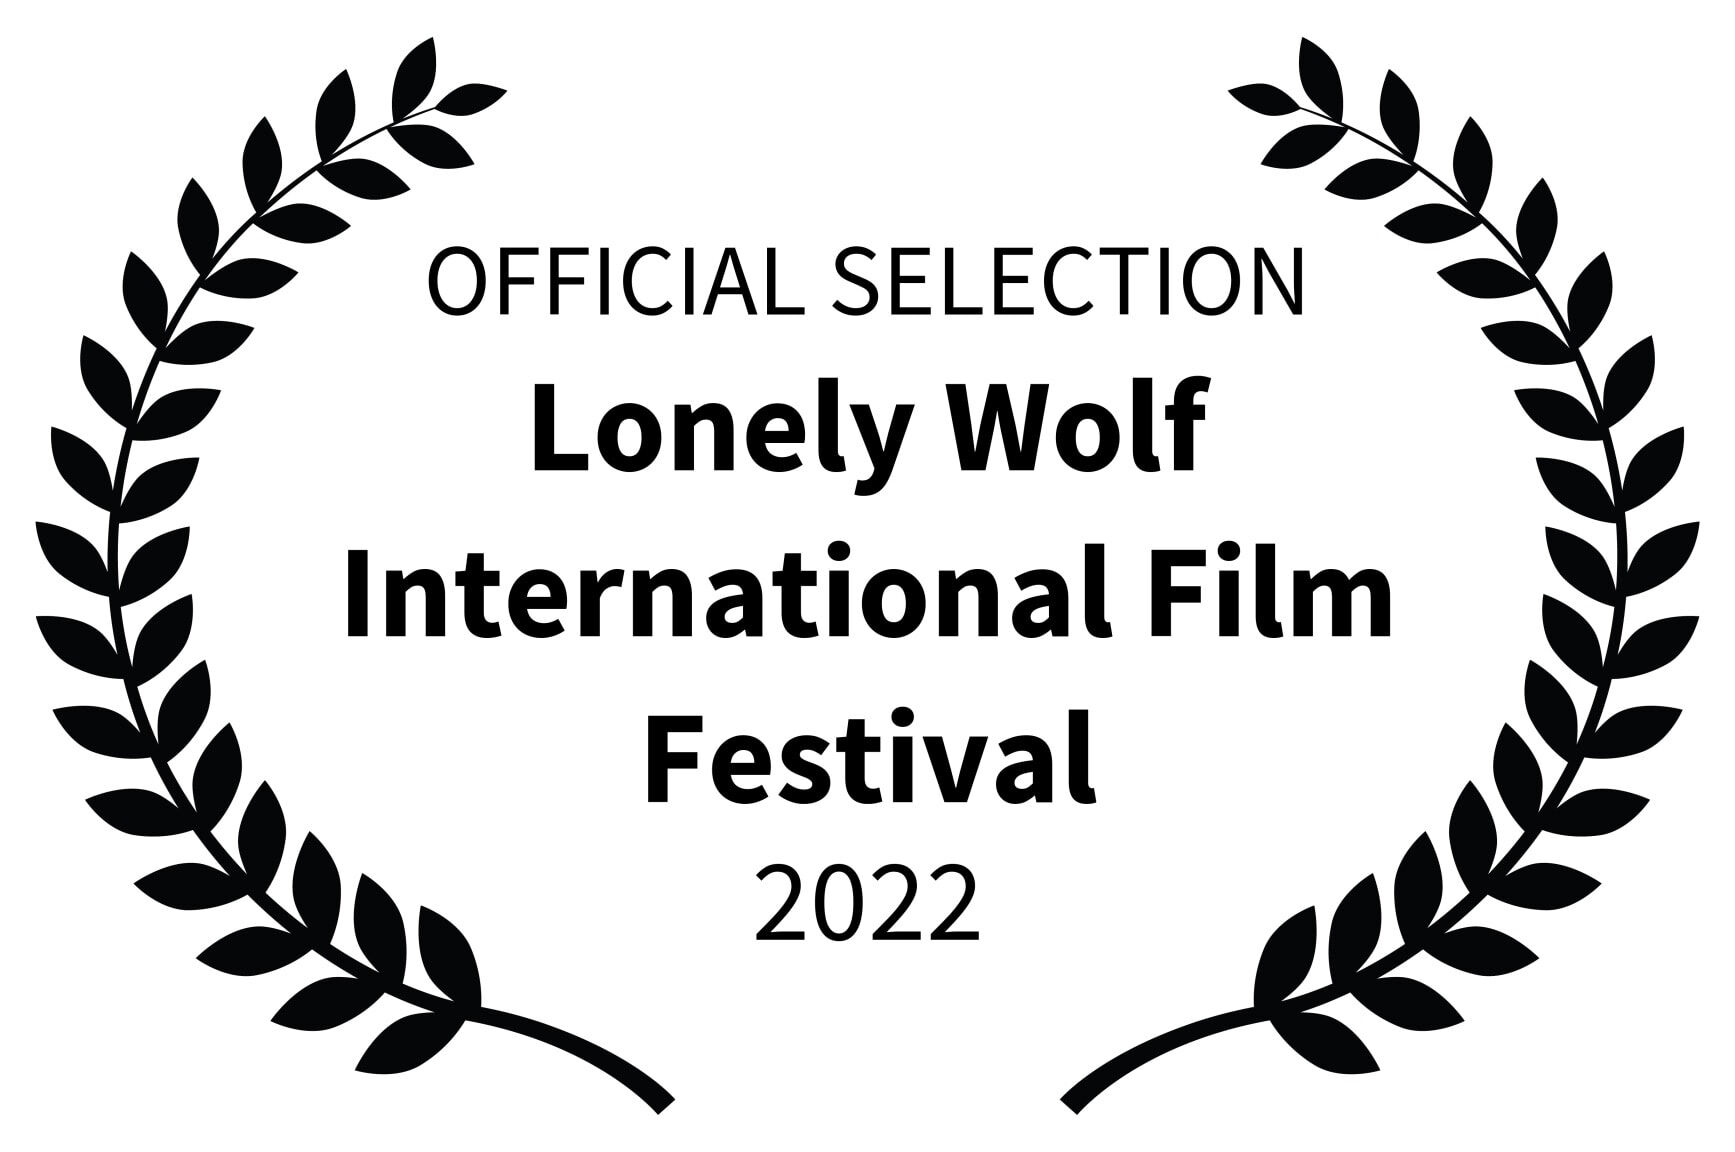 OFFICIAL SELECTION - Lonely Wolf International Film Festival - 2022